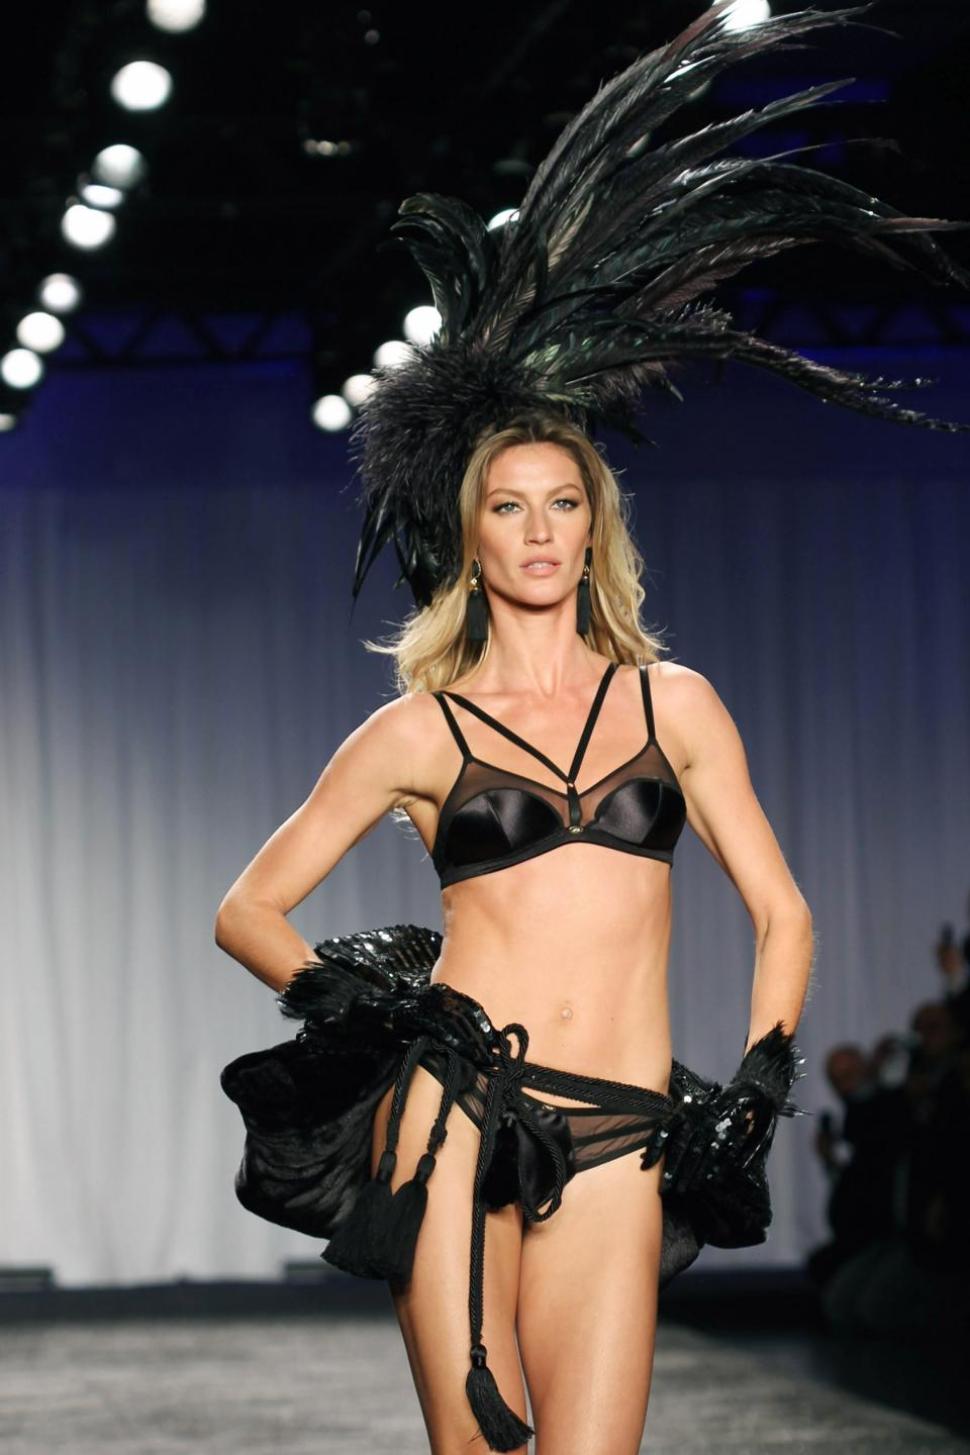 Gisele Bundchen earned $    47 million this year before taxes. 